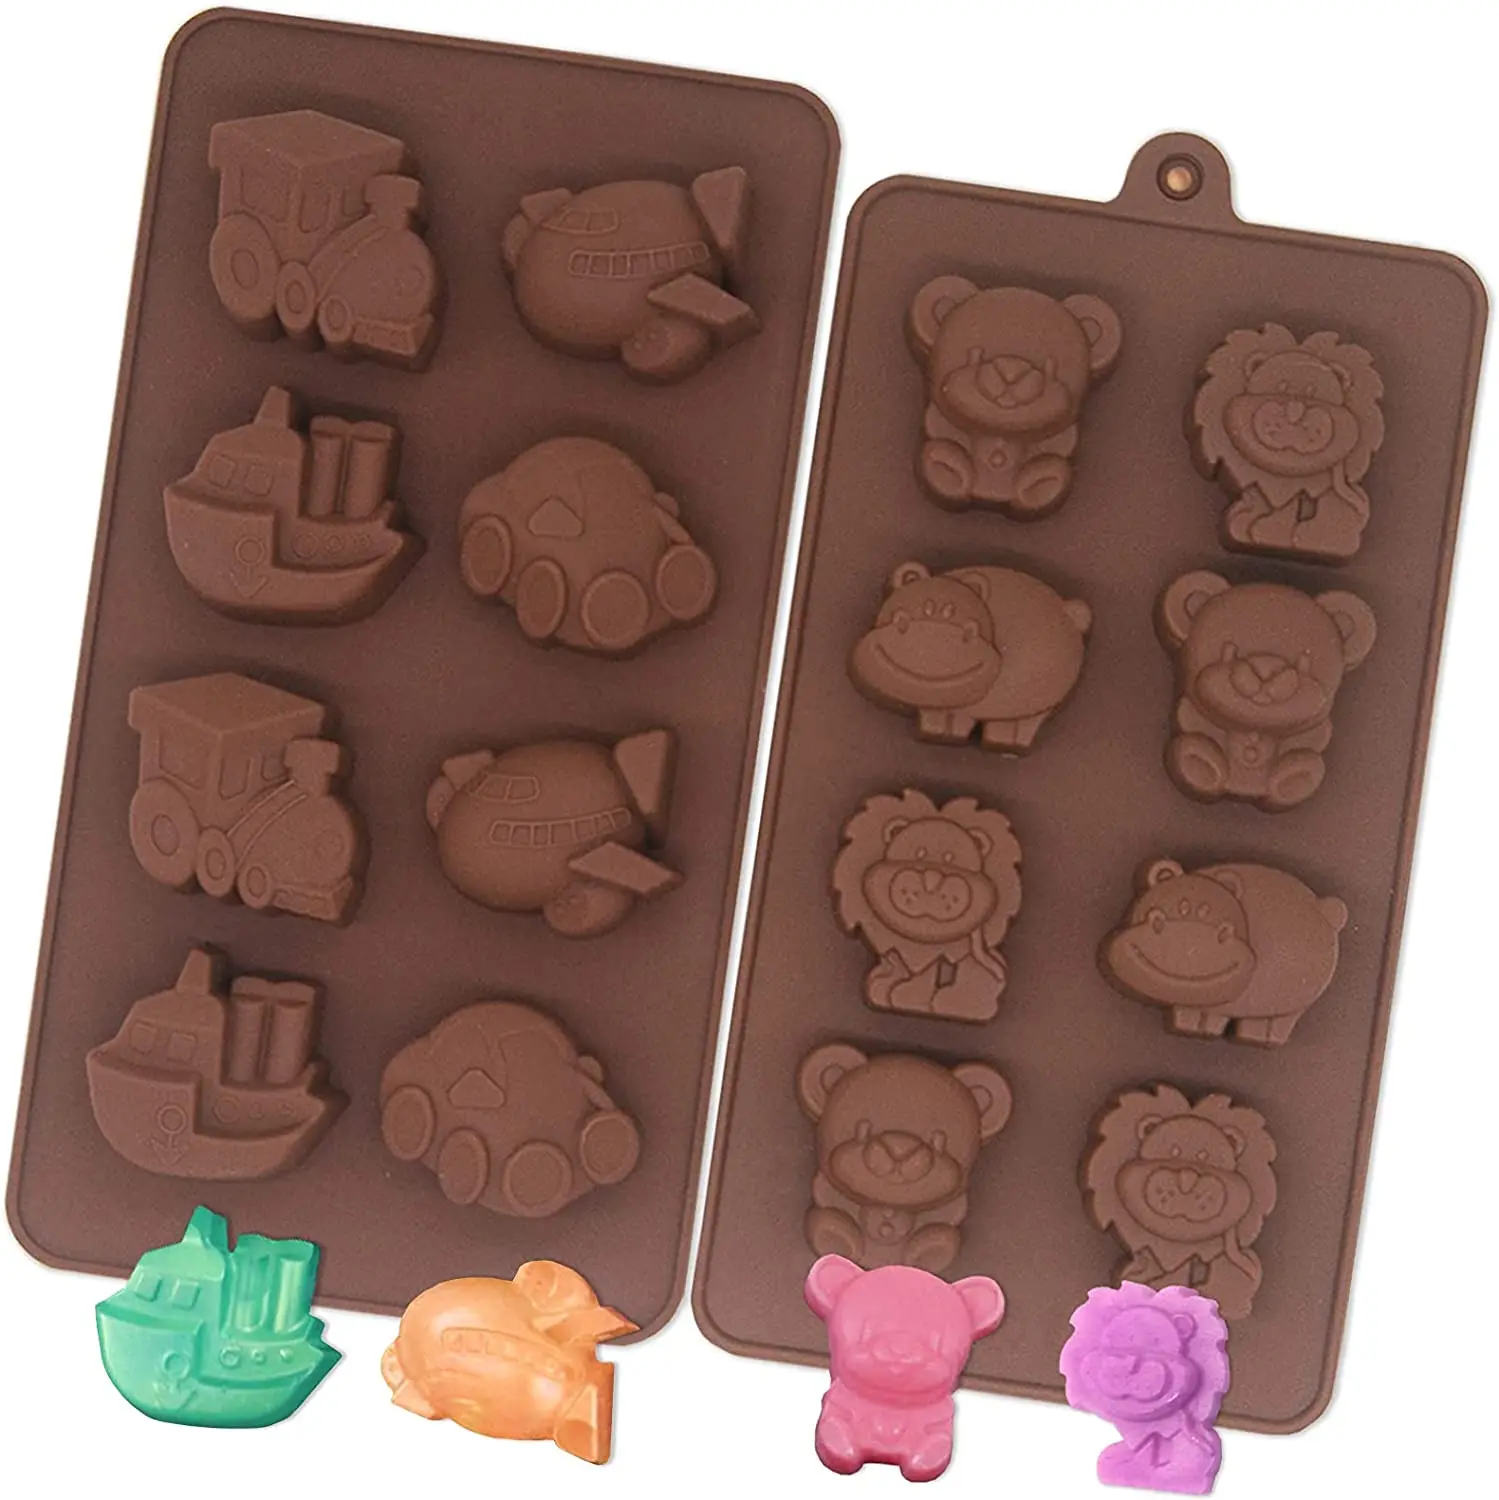 

2Pcs Silicone Chocolate Mold,Vehicles and Animal Shapes Mold for Making Chocolate, Waffle, Candy, Cookies